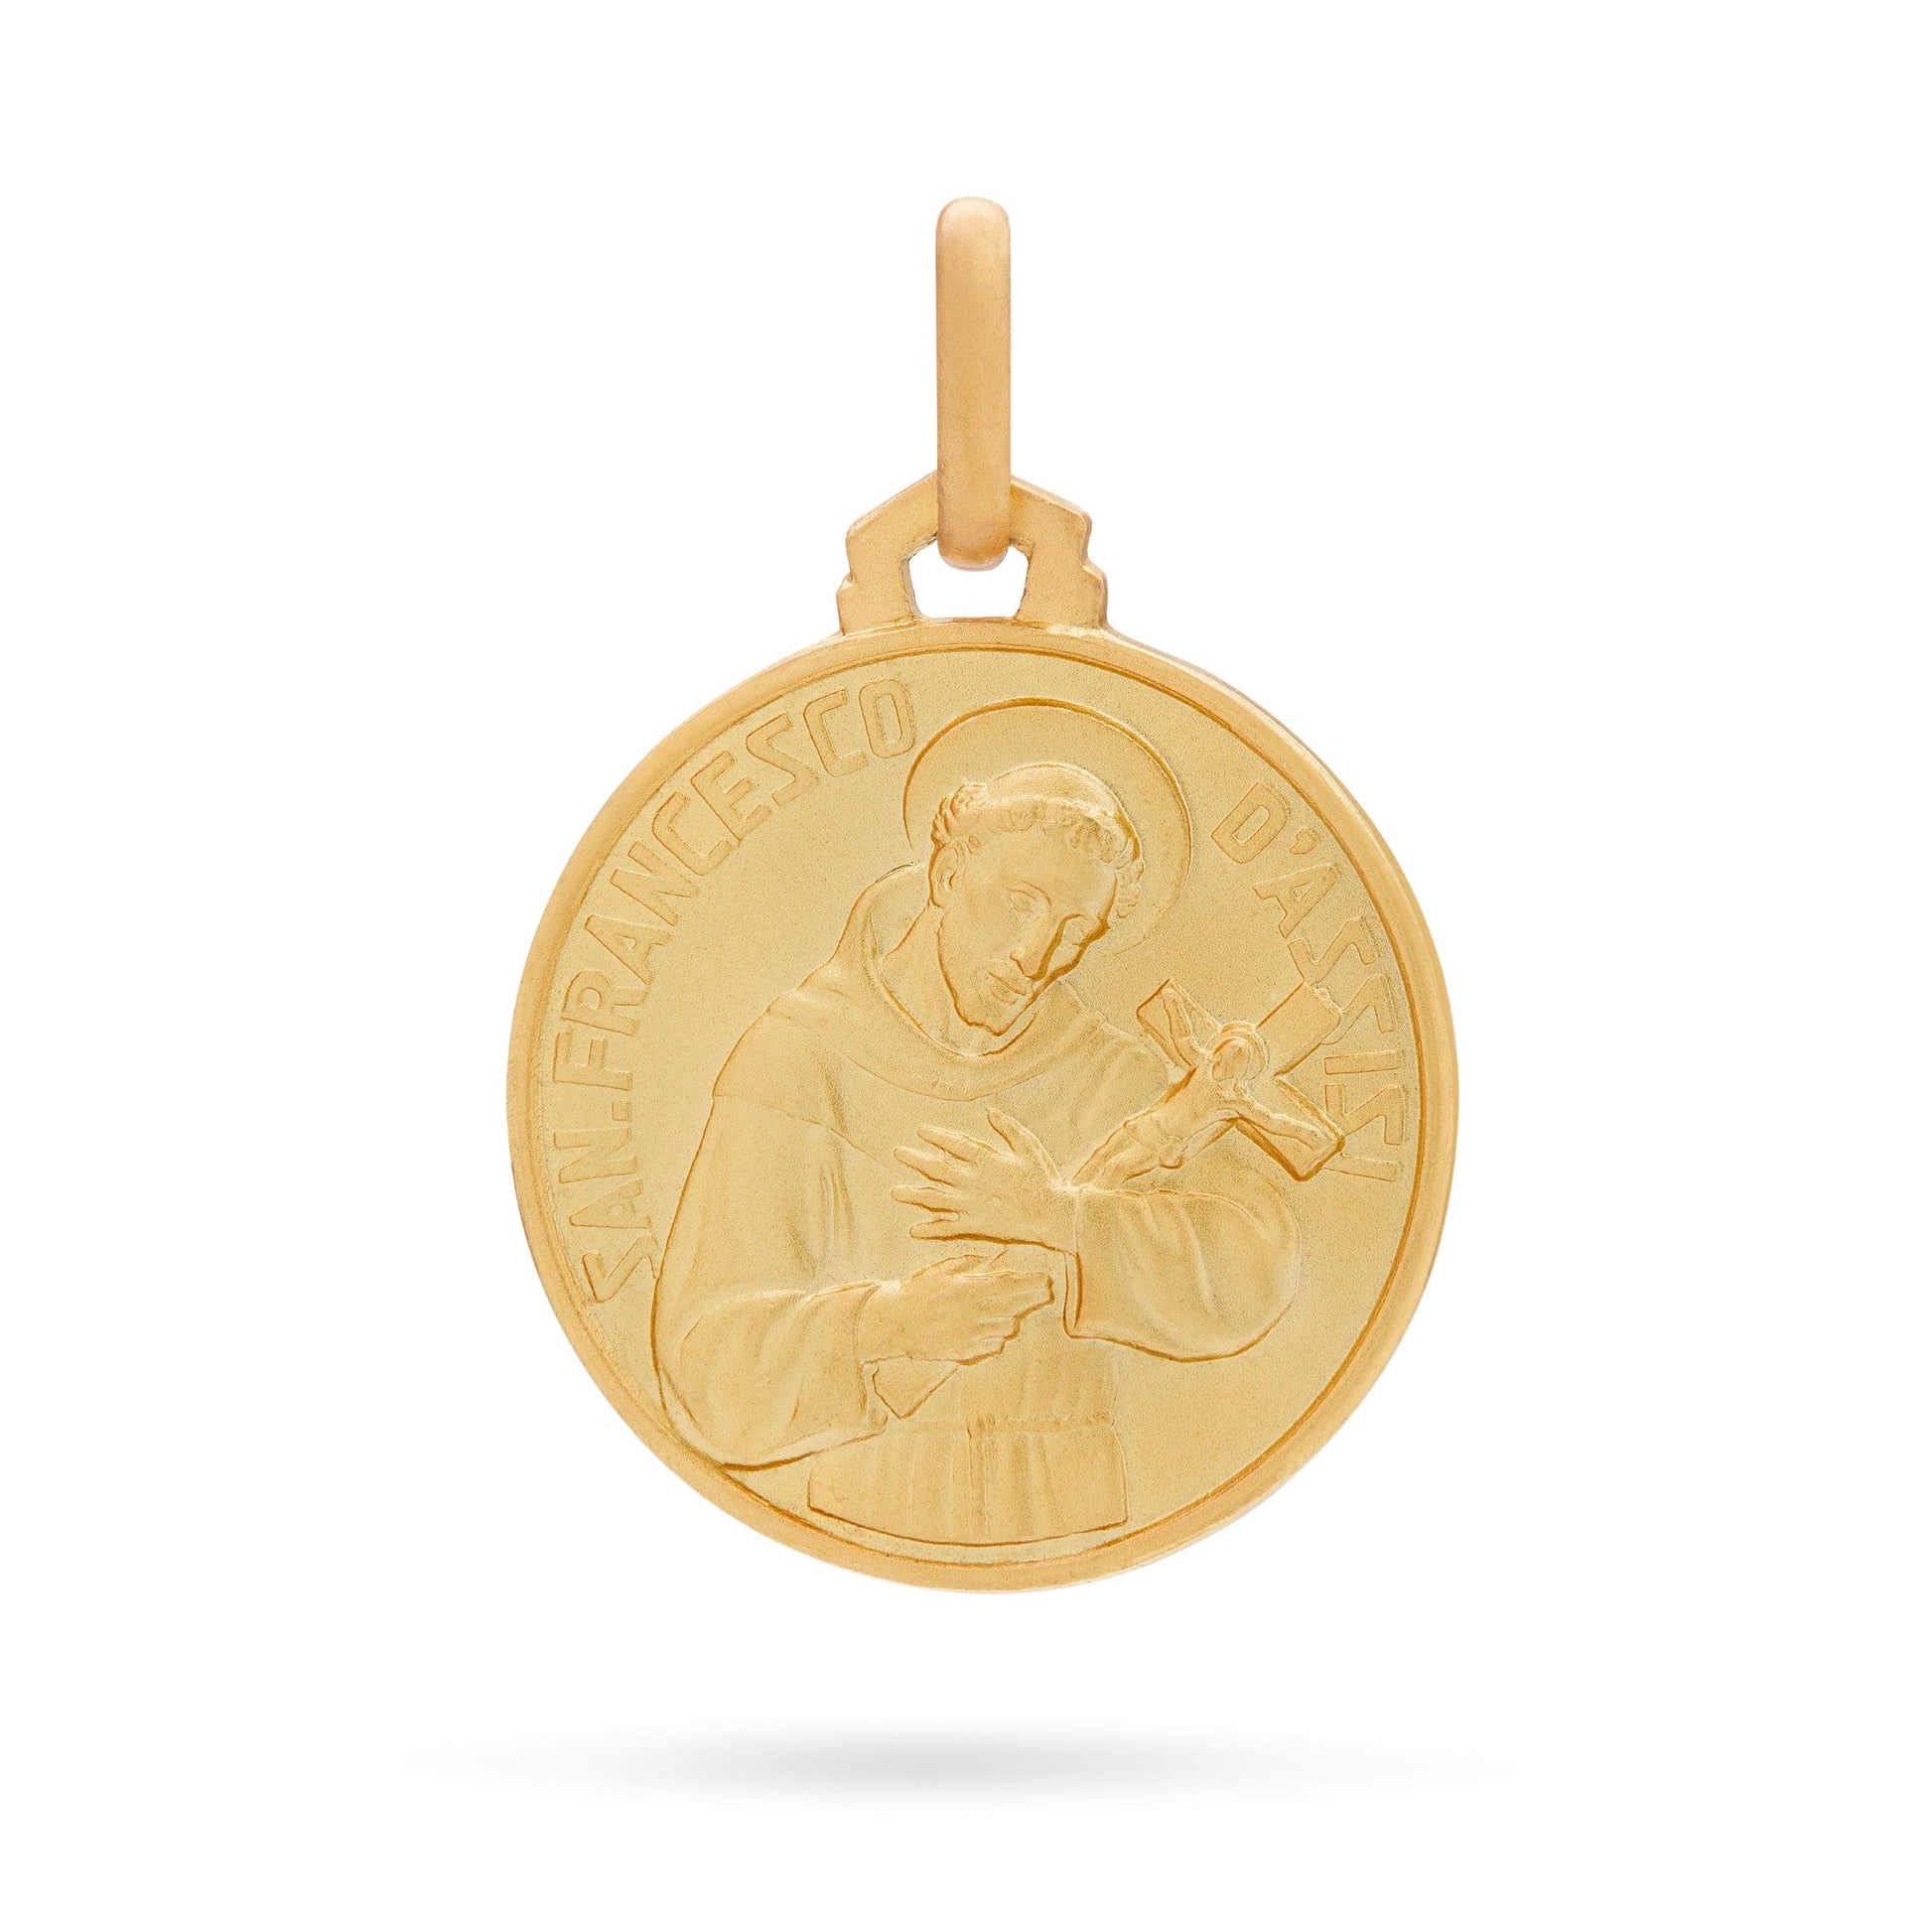 MONDO CATTOLICO Medal 10 mm (0.40 in) Gold medal of Saint Francis of Assisi